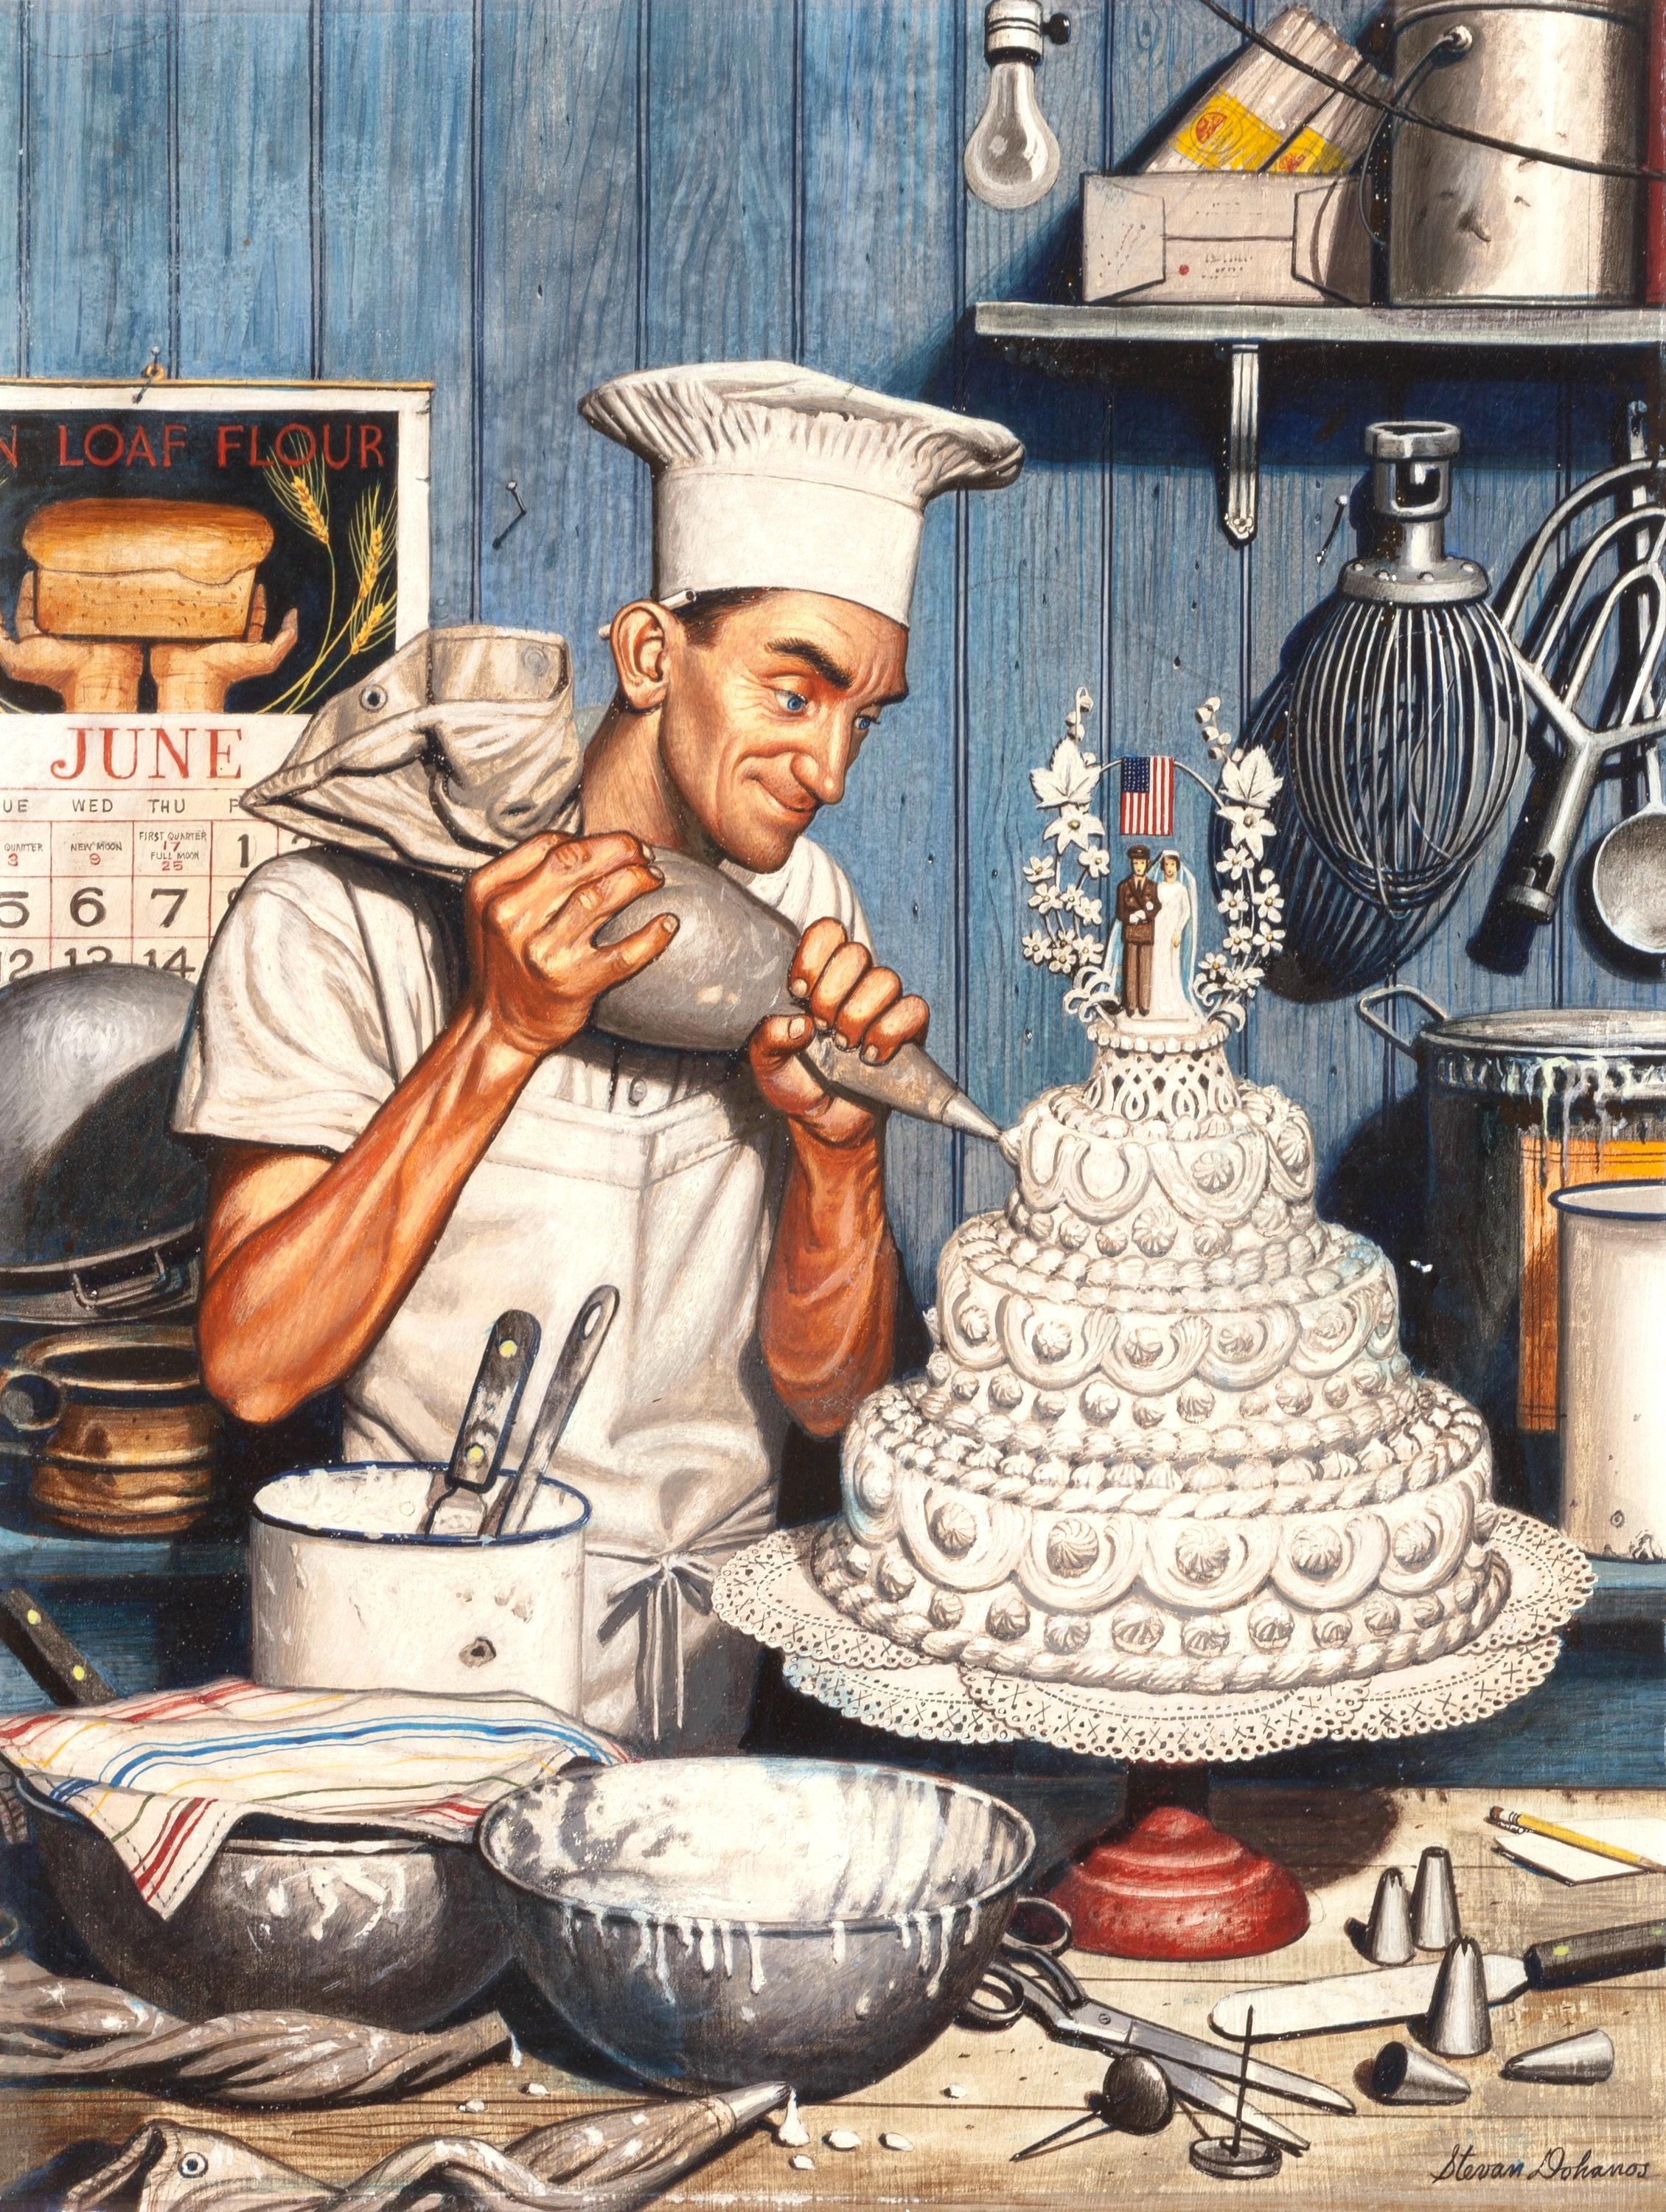 Icing the Cake, Cover of The Saturday Evening Post 